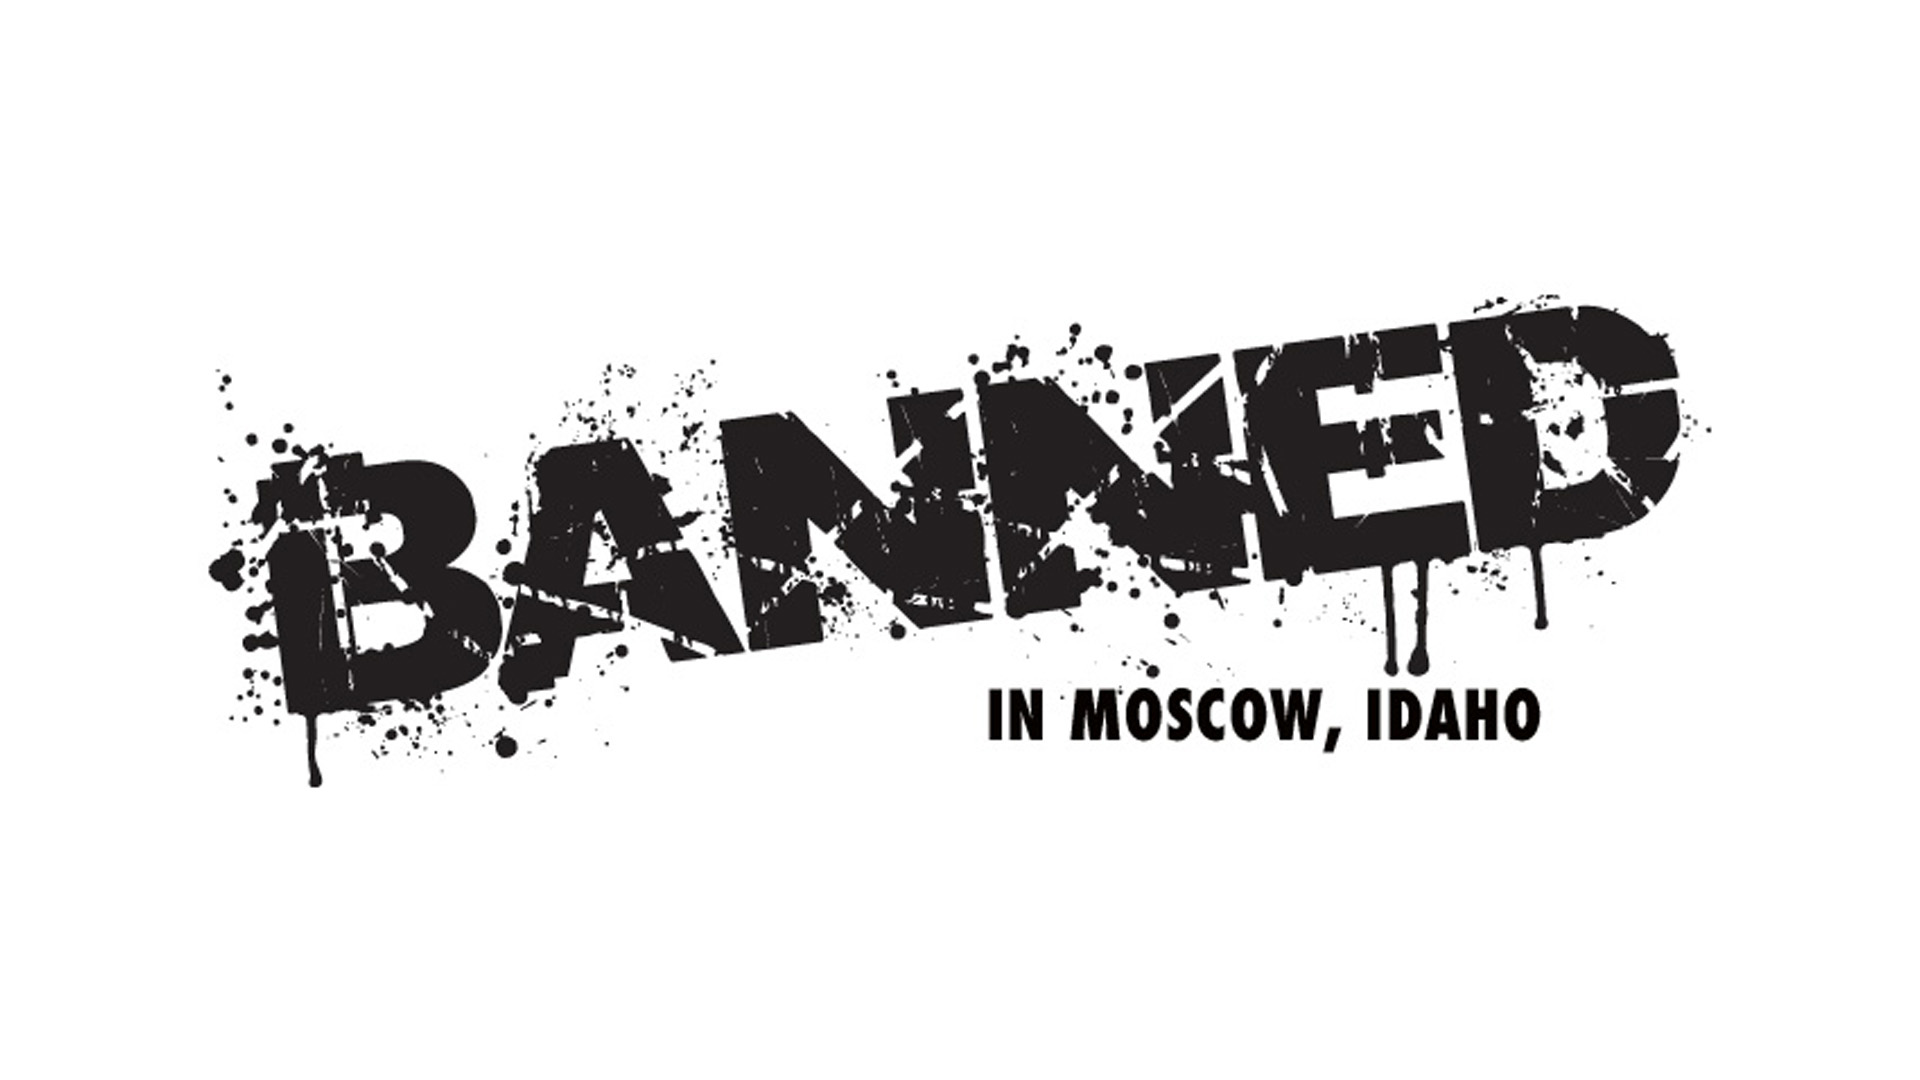 Gary DeMar’s Prophecy Books have been Banned in Moscow